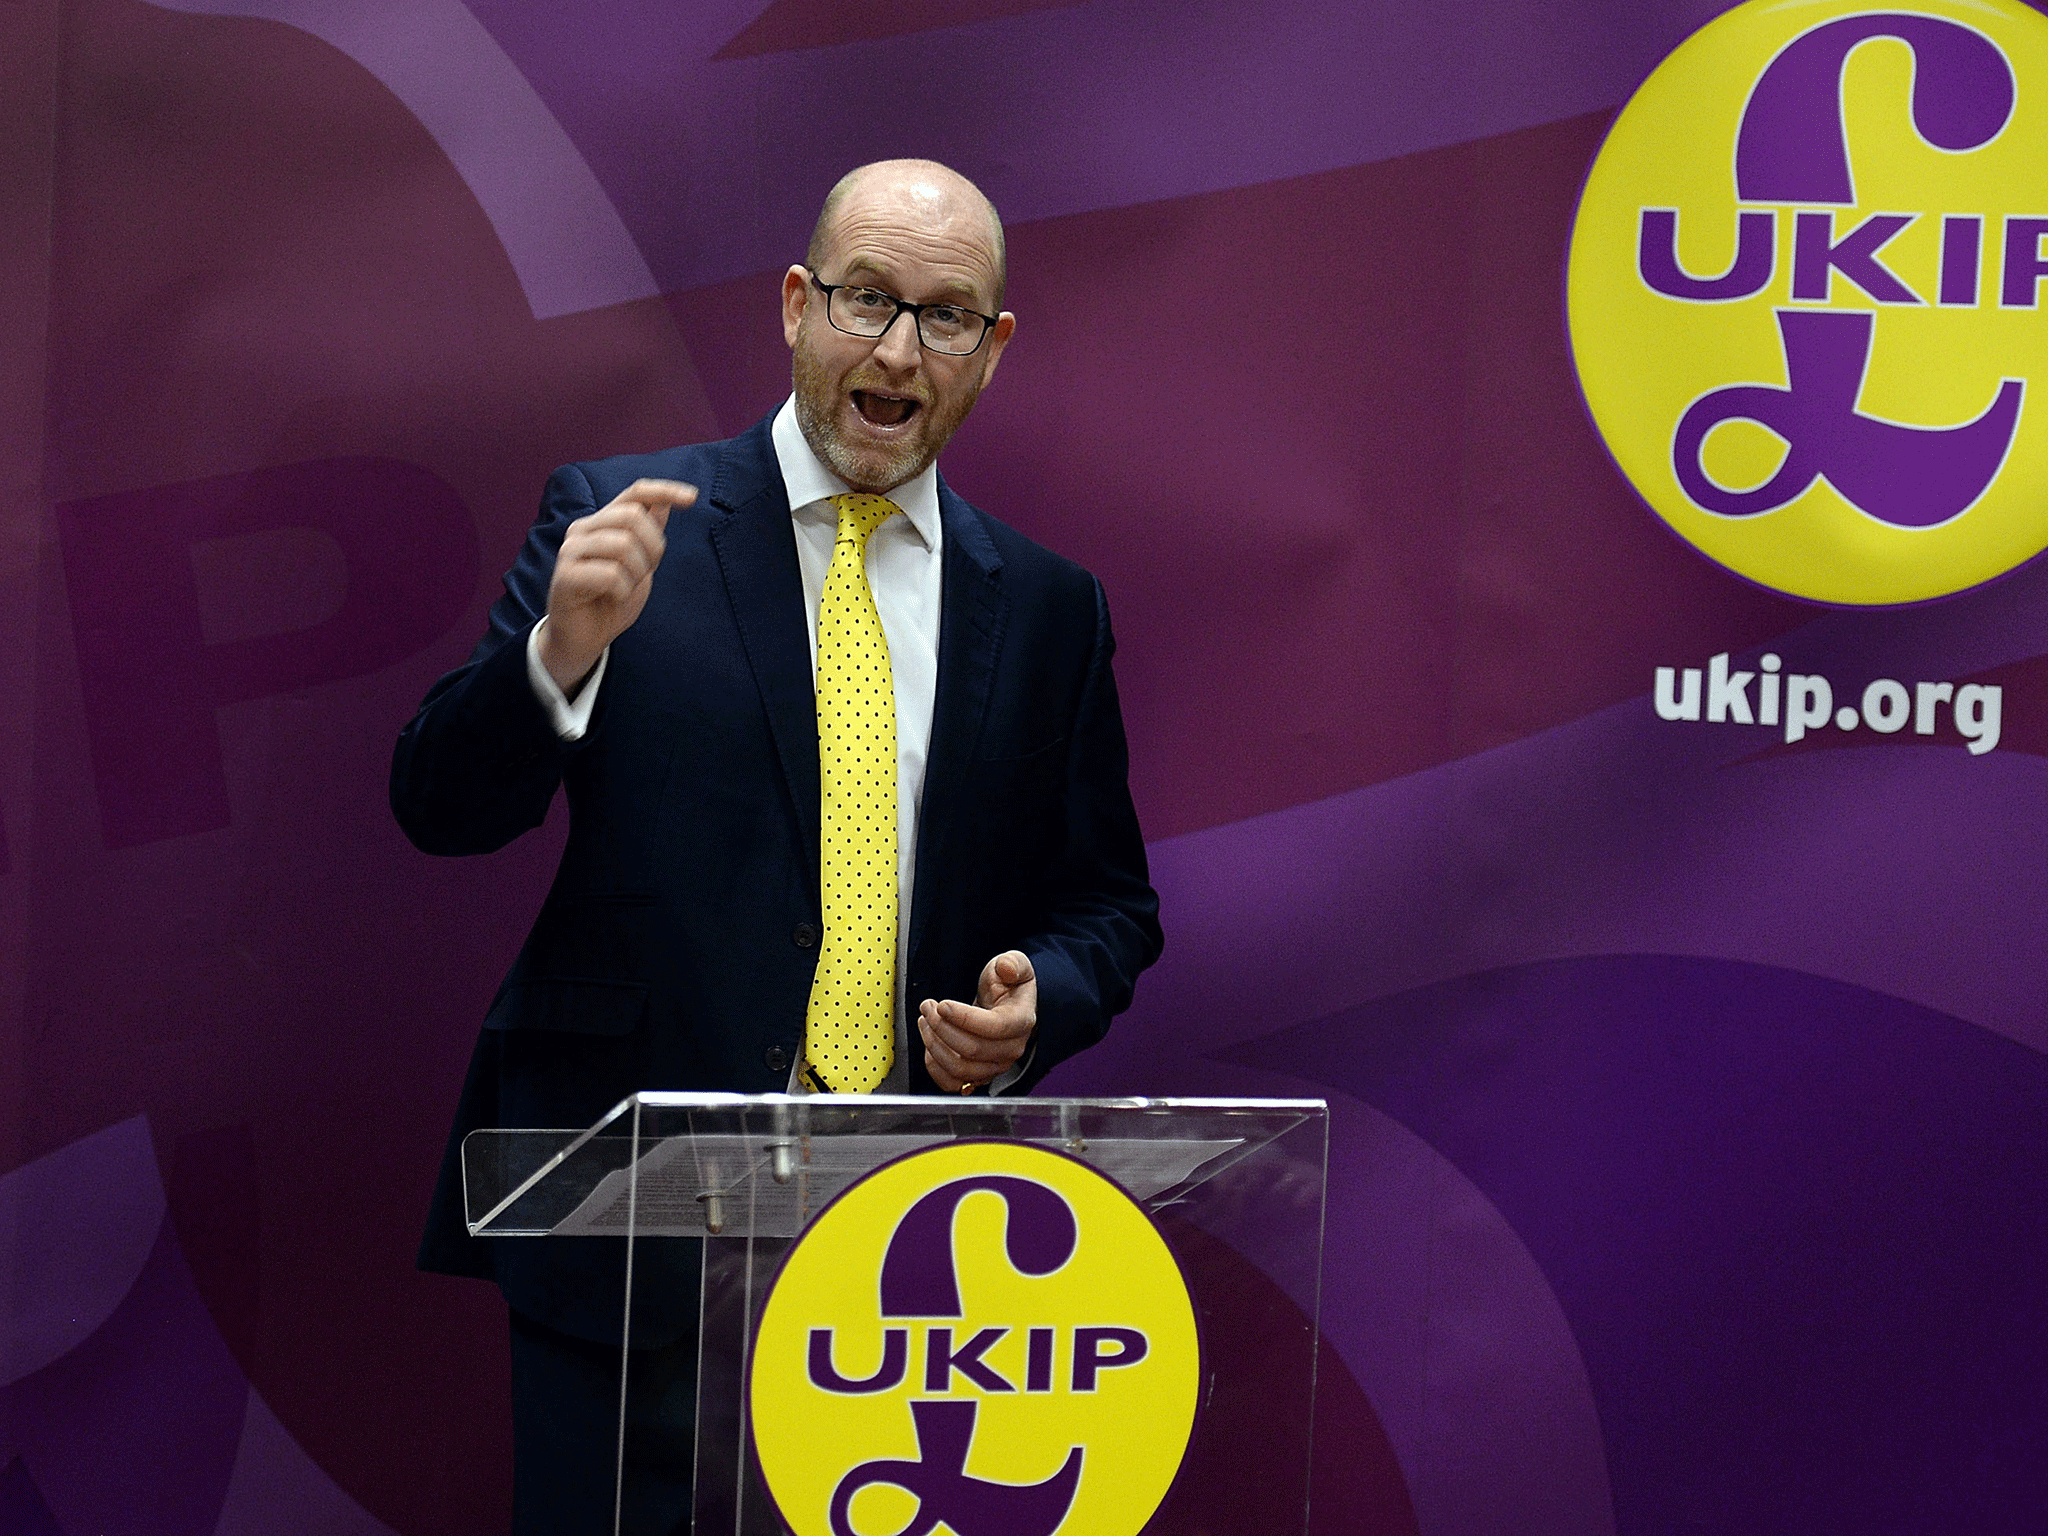 Paul Nuttall says rise in hate crimes after Brexit is 'fabricated'